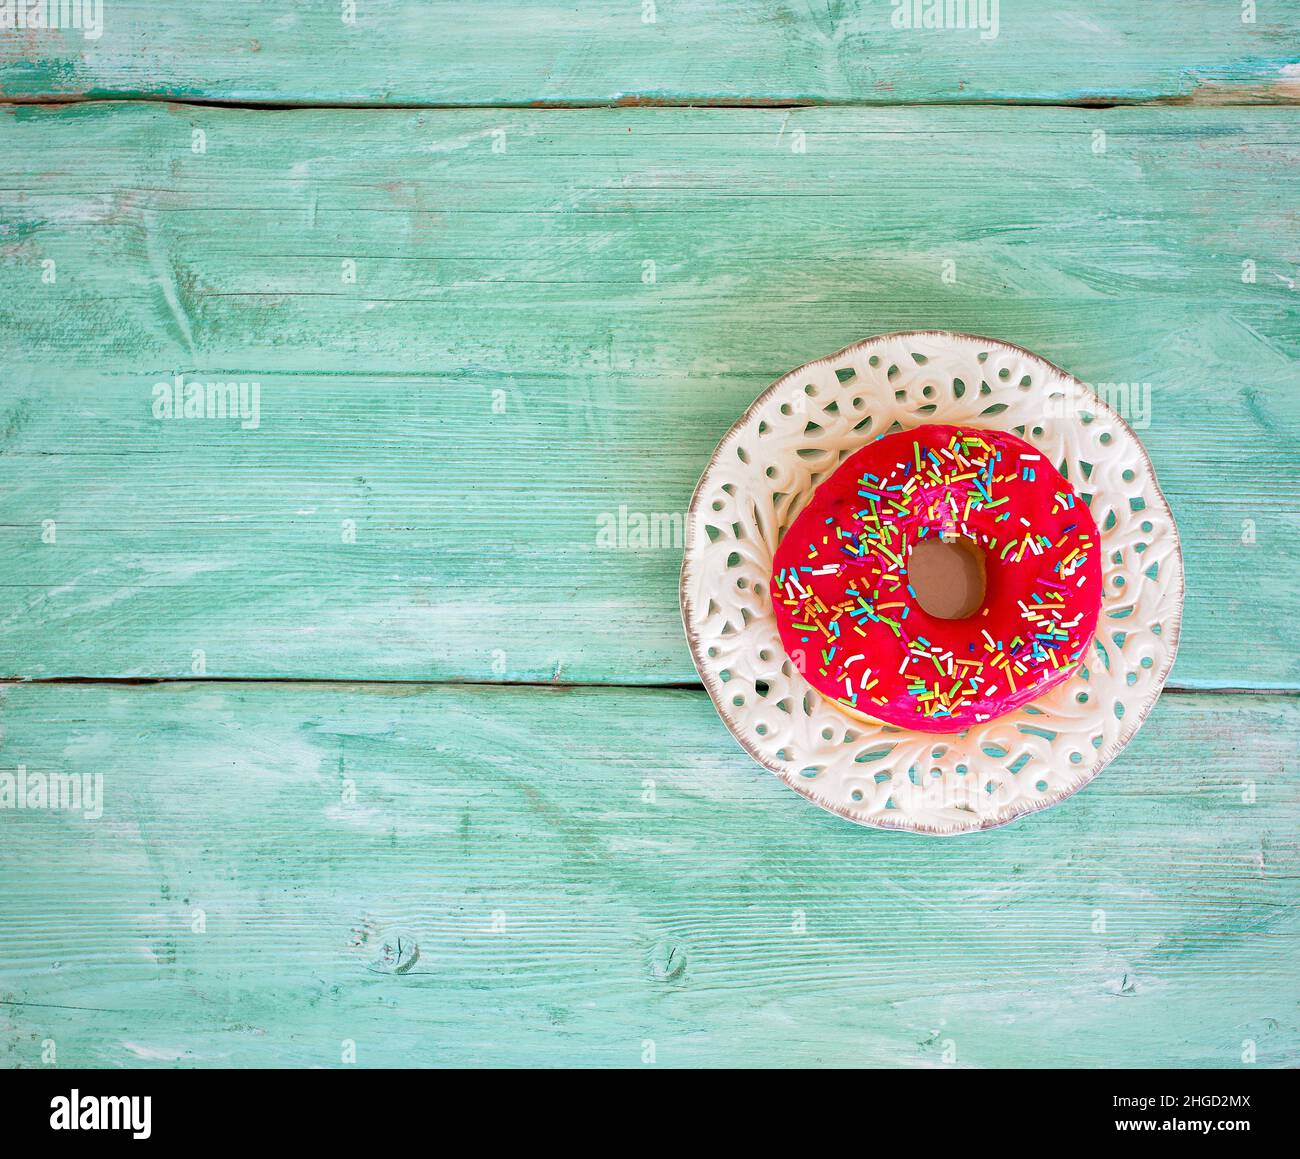 colorful doughnut on wooden surface Stock Photo